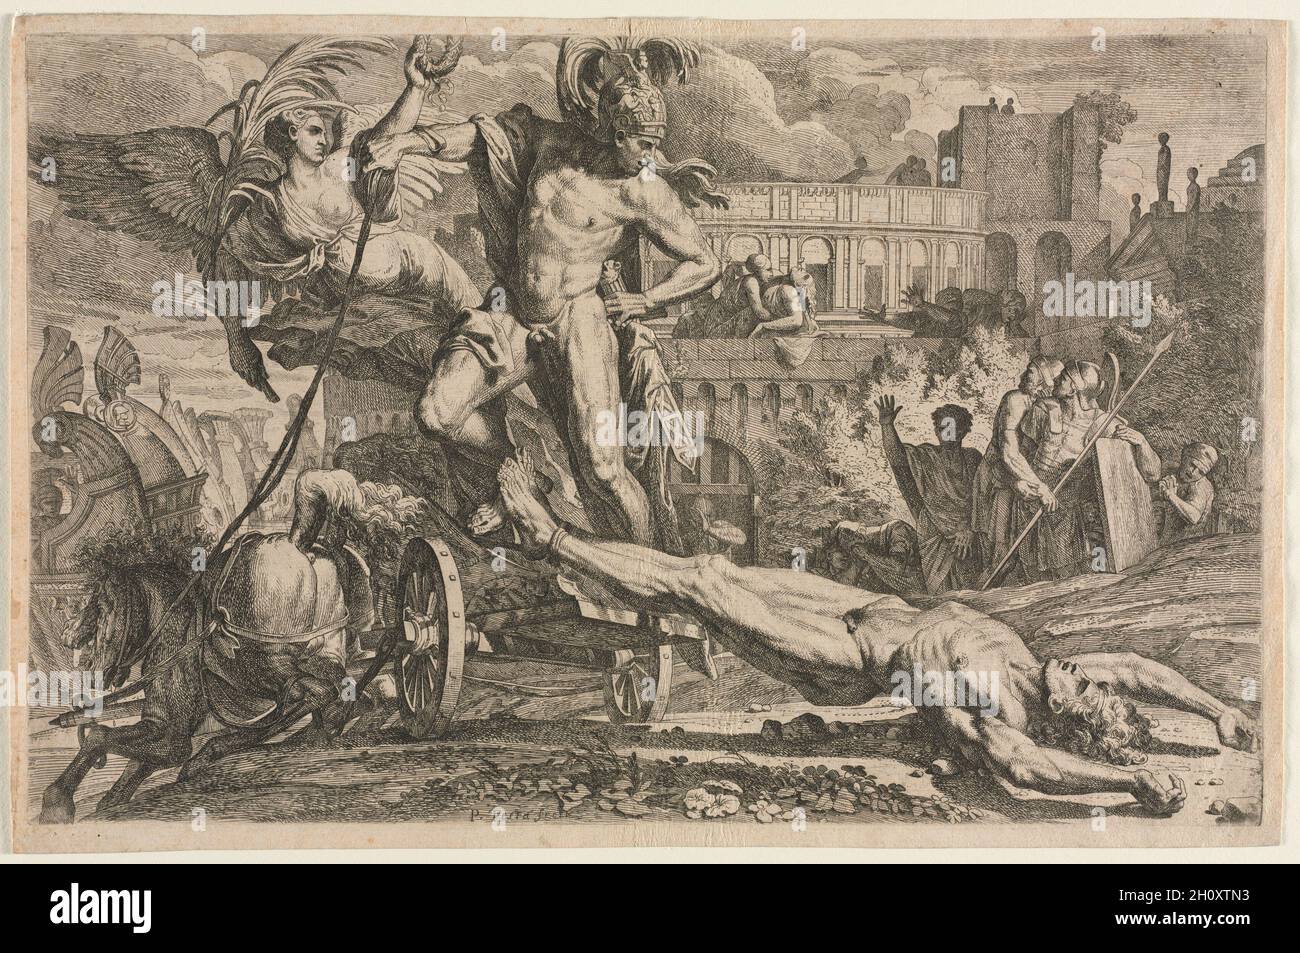 Achilles Dragging the Body of Hector, 1648. Pietro Testa (Italian, 1612-1650). Etching;  The strong diagonals and heroic male bodies in this print relay an episode from the Trojan War in which the Greek warrior Achilles takes vengeance on the Trojan prince Hector for murdering his friend Patroclus. Here, Achilles is depicted dragging Hector’s dead body behind a chariot outside the gates of Troy. Primarily a draftsman and printmaker, Pietro Testa was known for the remarkable effects of space, texture, and light he was able to achieve by immersing the copper plate in an acid bath in several stag Stock Photo